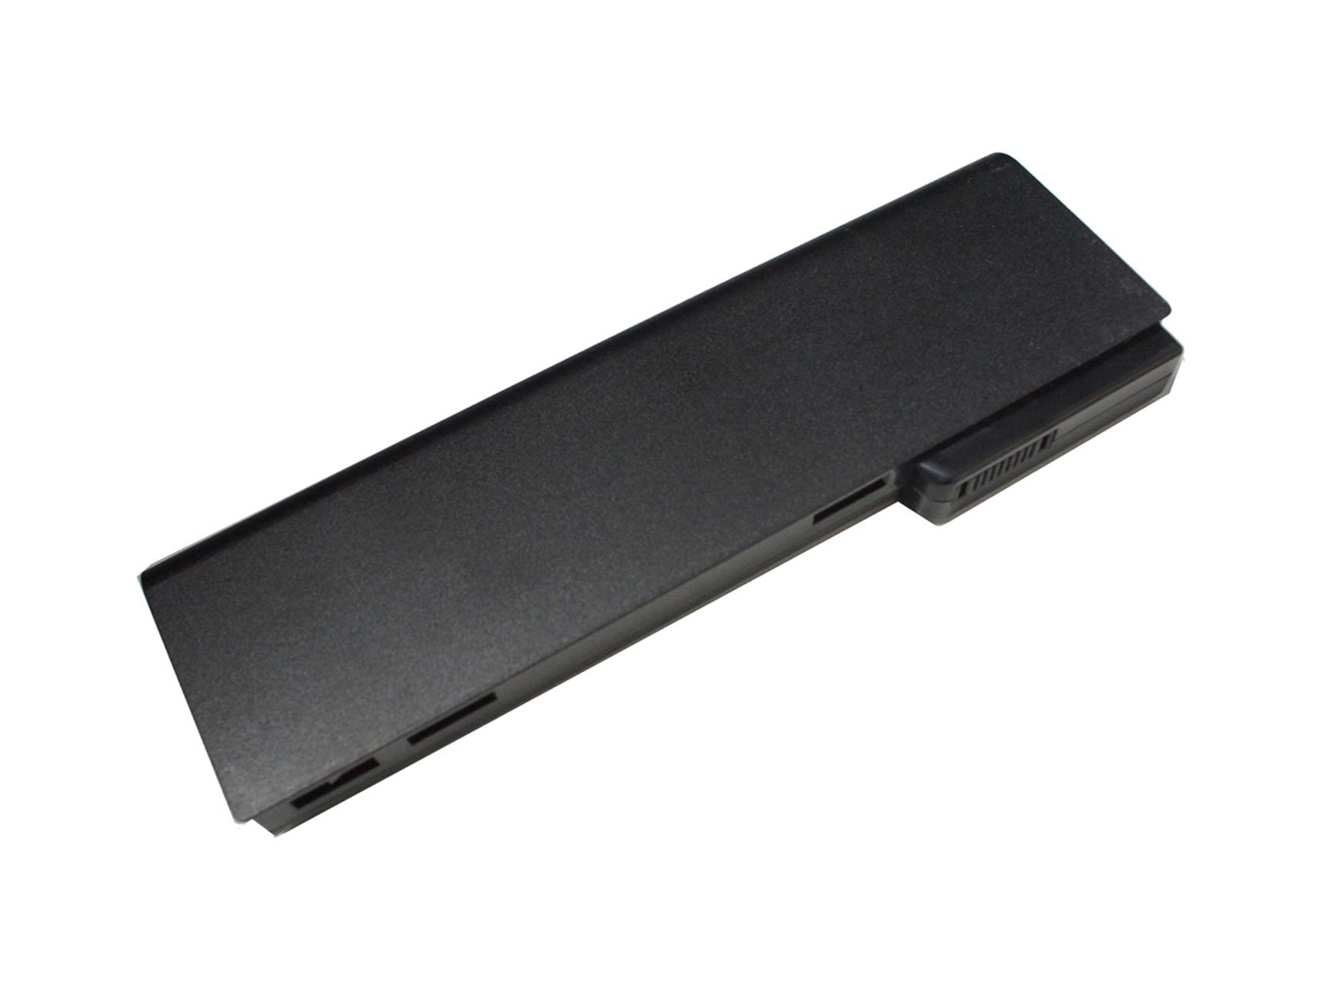 628664-001, 628666-001 replacement Laptop Battery for HP 6360t Mobile Thin Client, EliteBook 8460p, 7800mAh, 11.10V